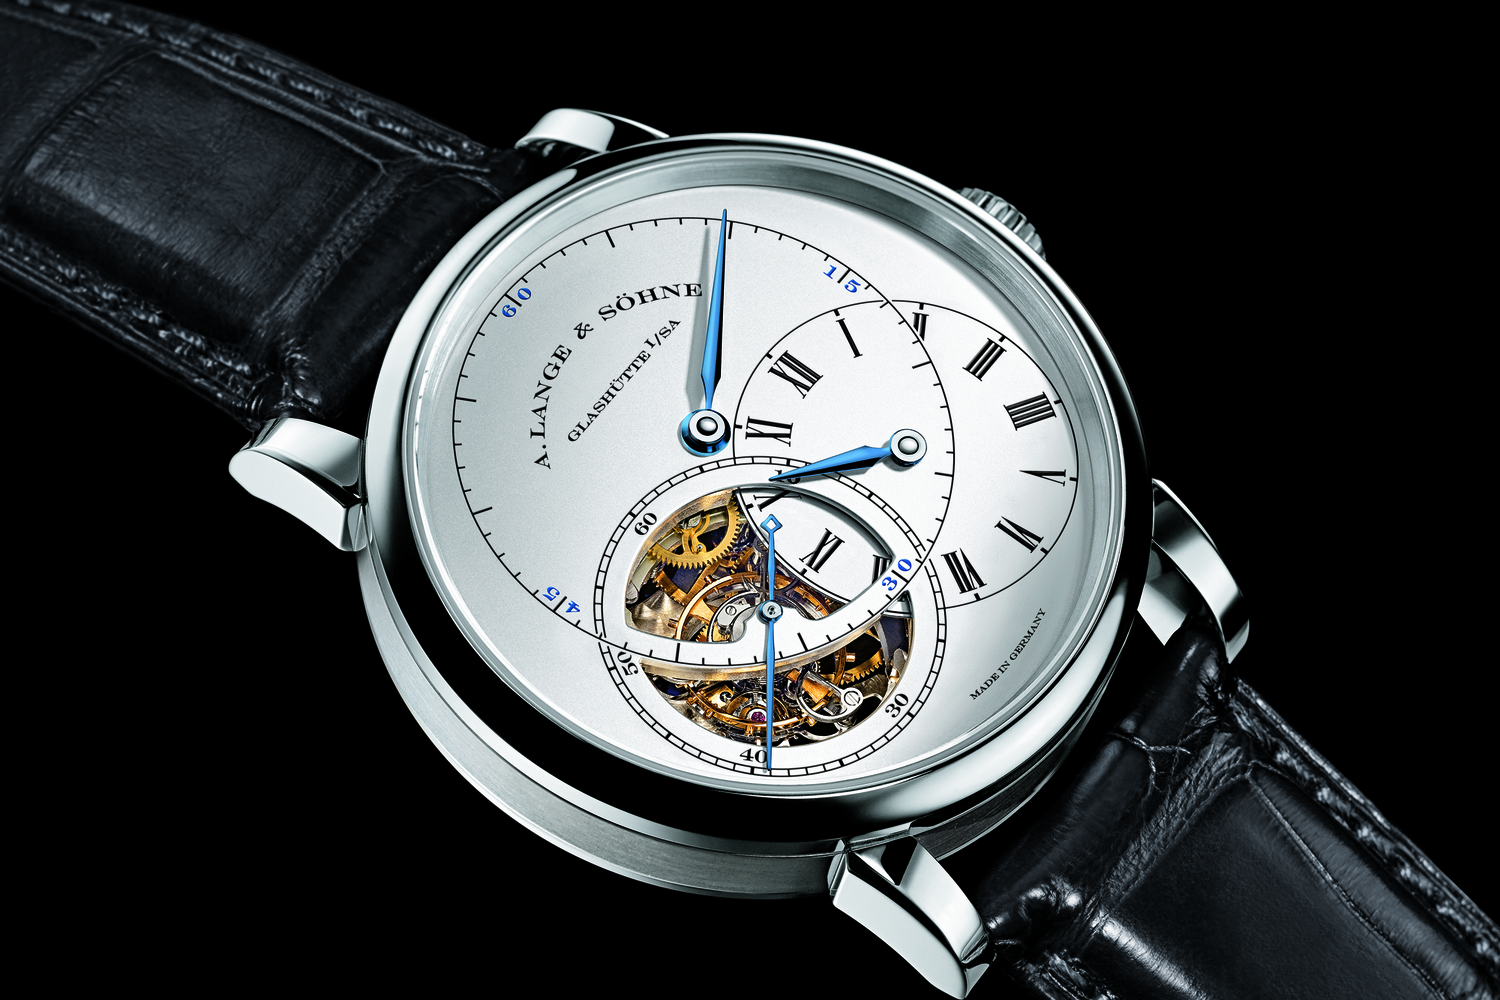 Step Into The Incredible World Of A. Lange & Söhne - Watches of Switzerland